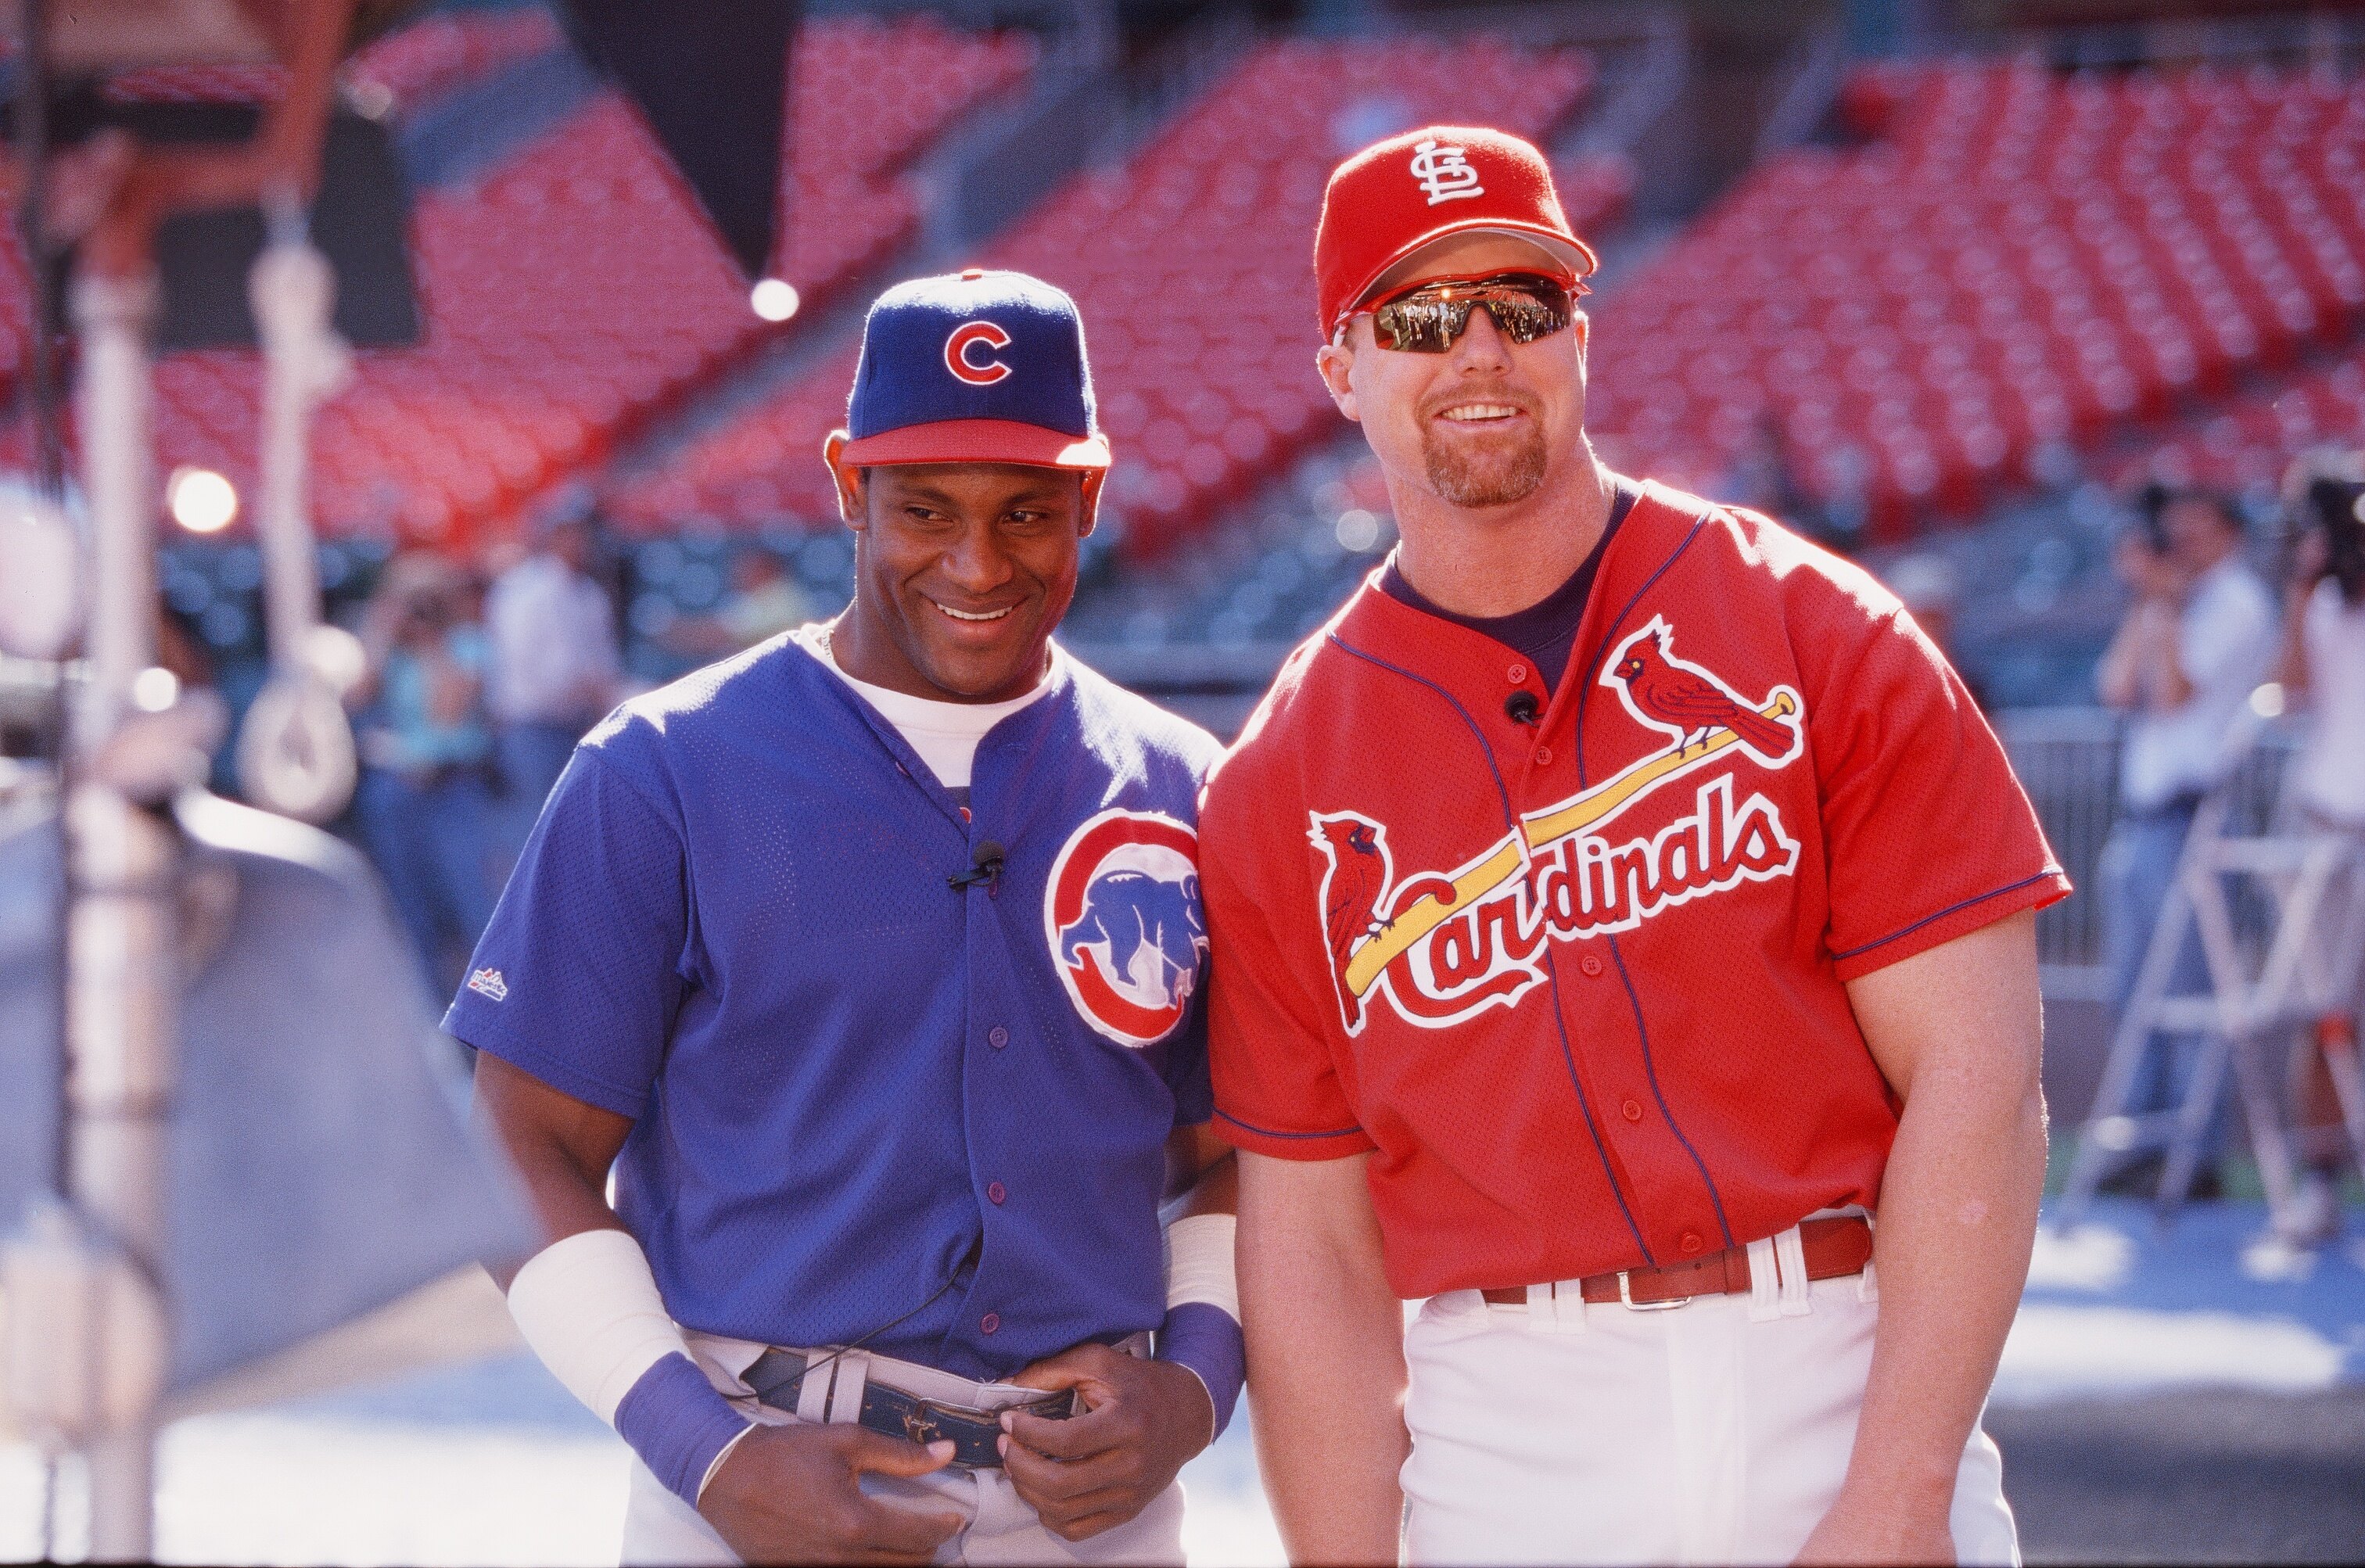 Sammy Sosa and Michael Jordan, two of the biggest names in sports